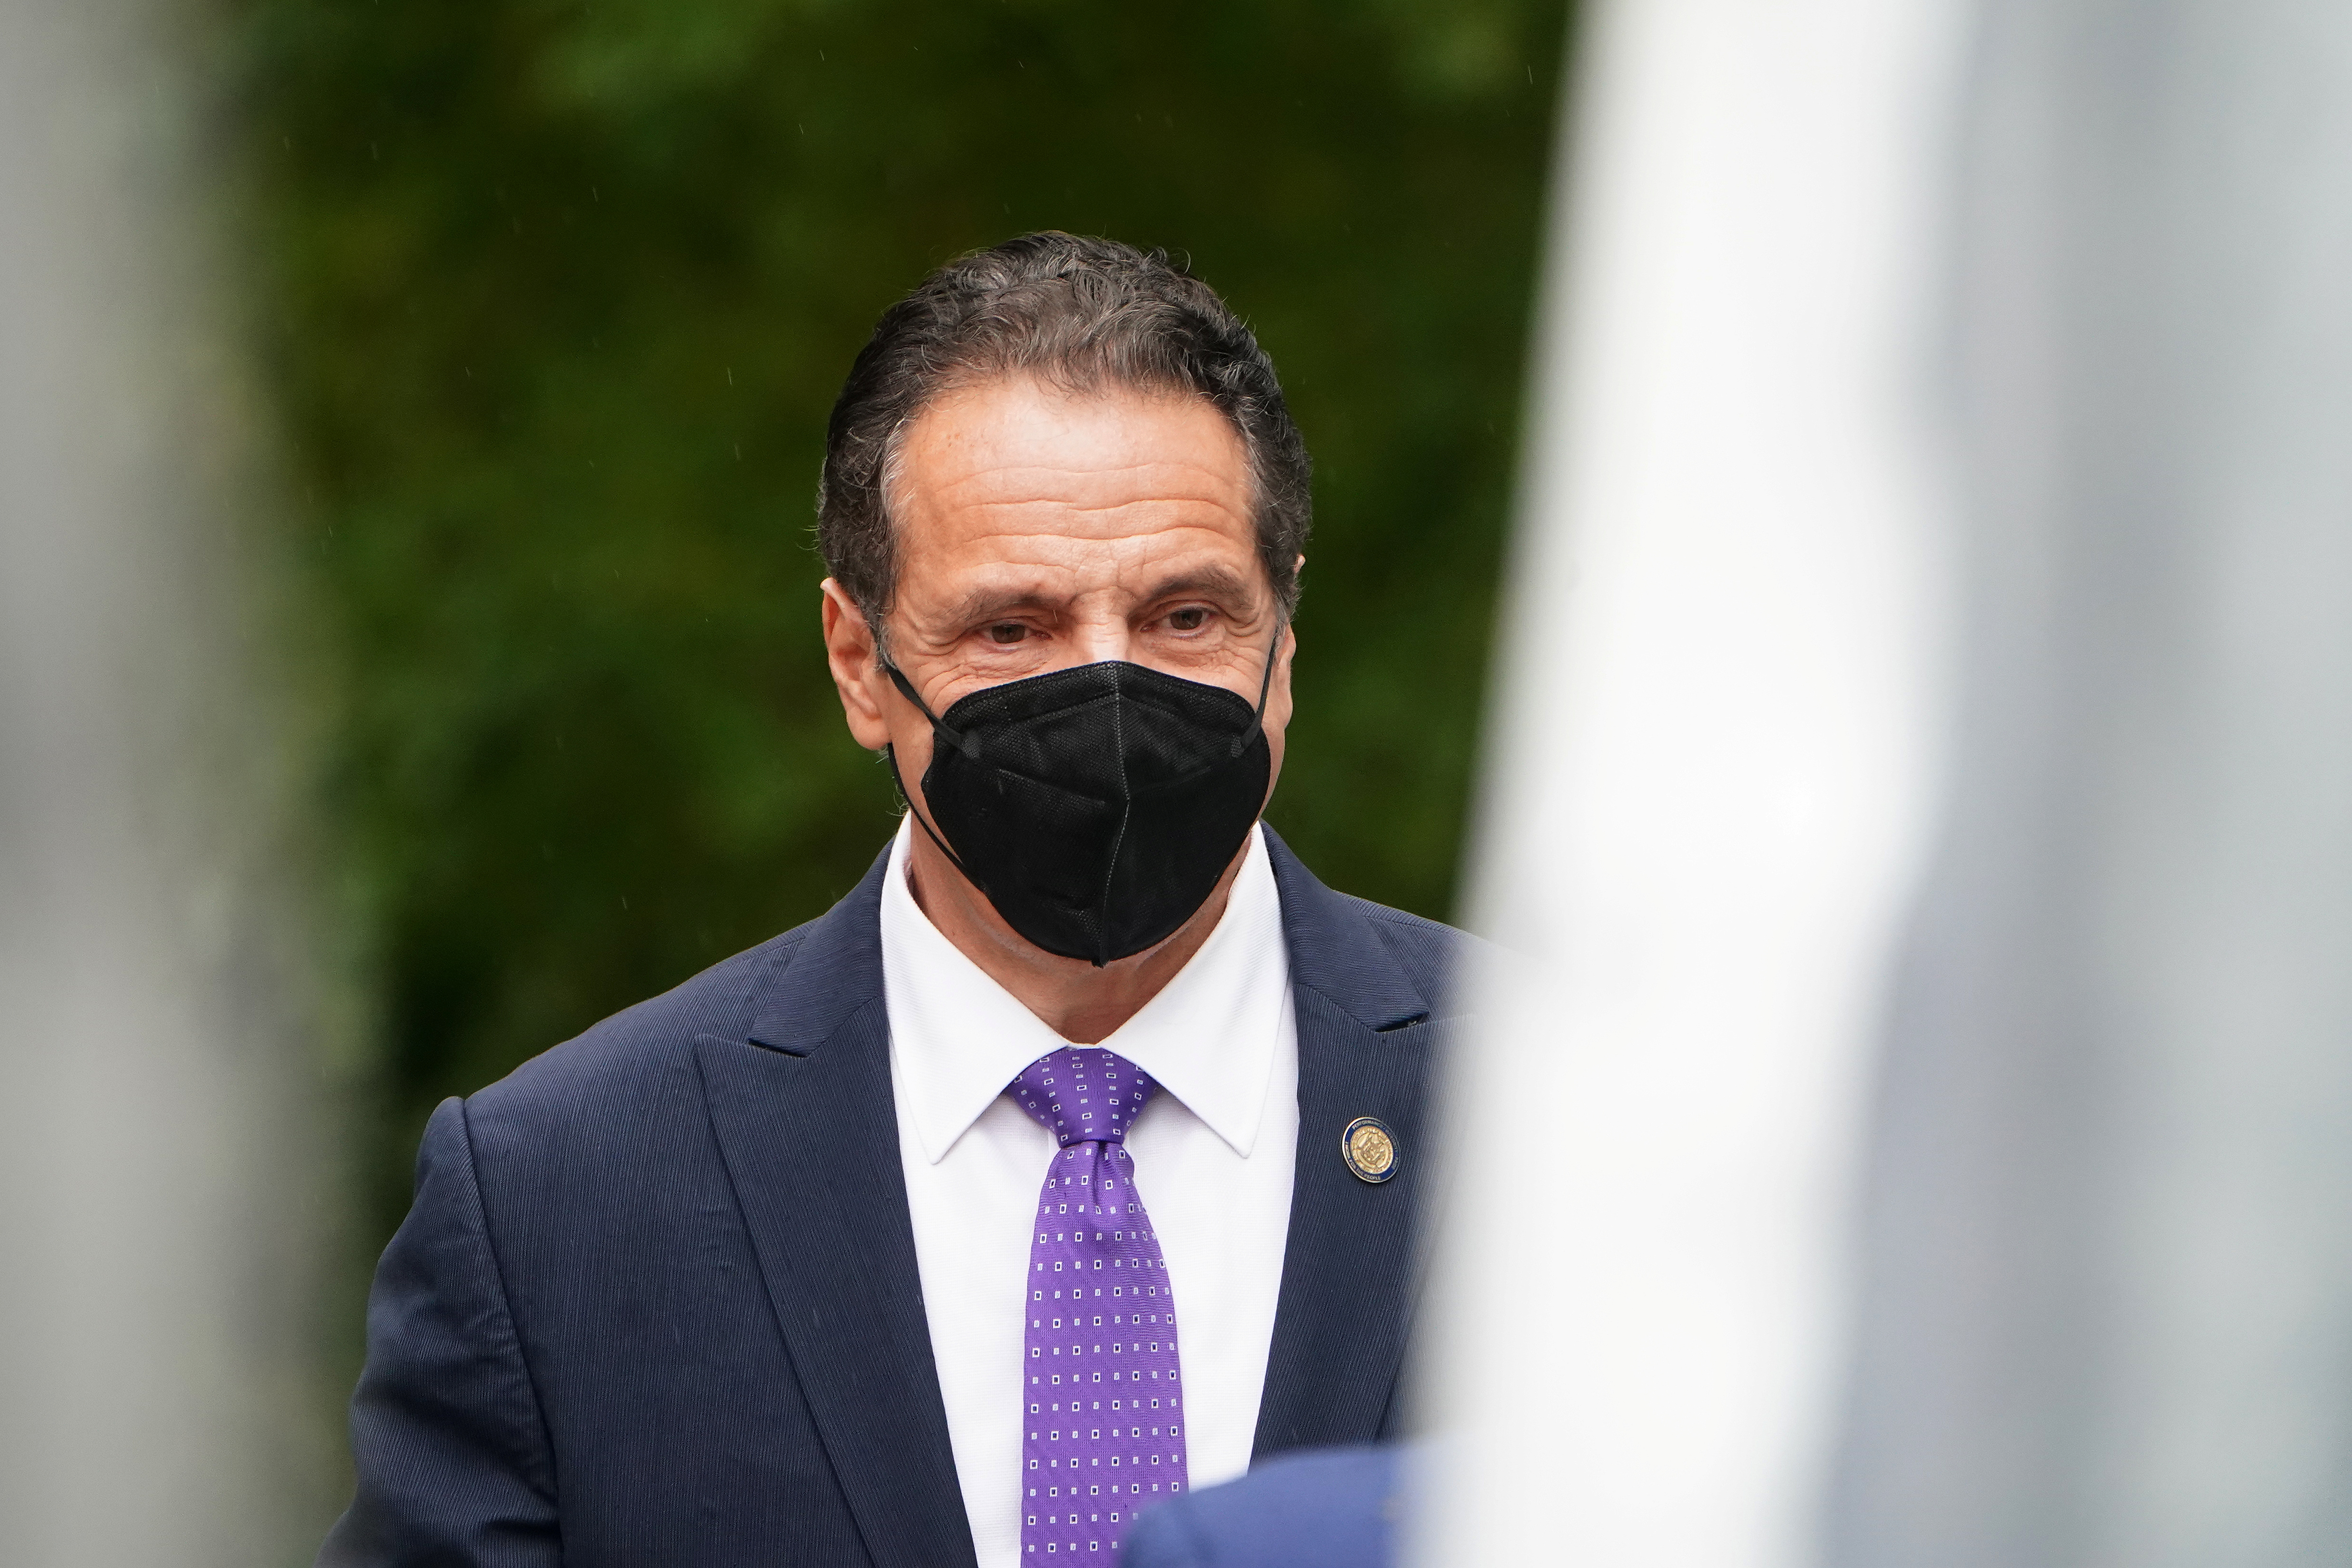 Governor of New York Andrew Cuomo arrives at the unveiling for the Mother Cabrini statue in the Manhattan borough of New York City, New York, U.S., October 12, 2020. REUTERS/Carlo Allegri